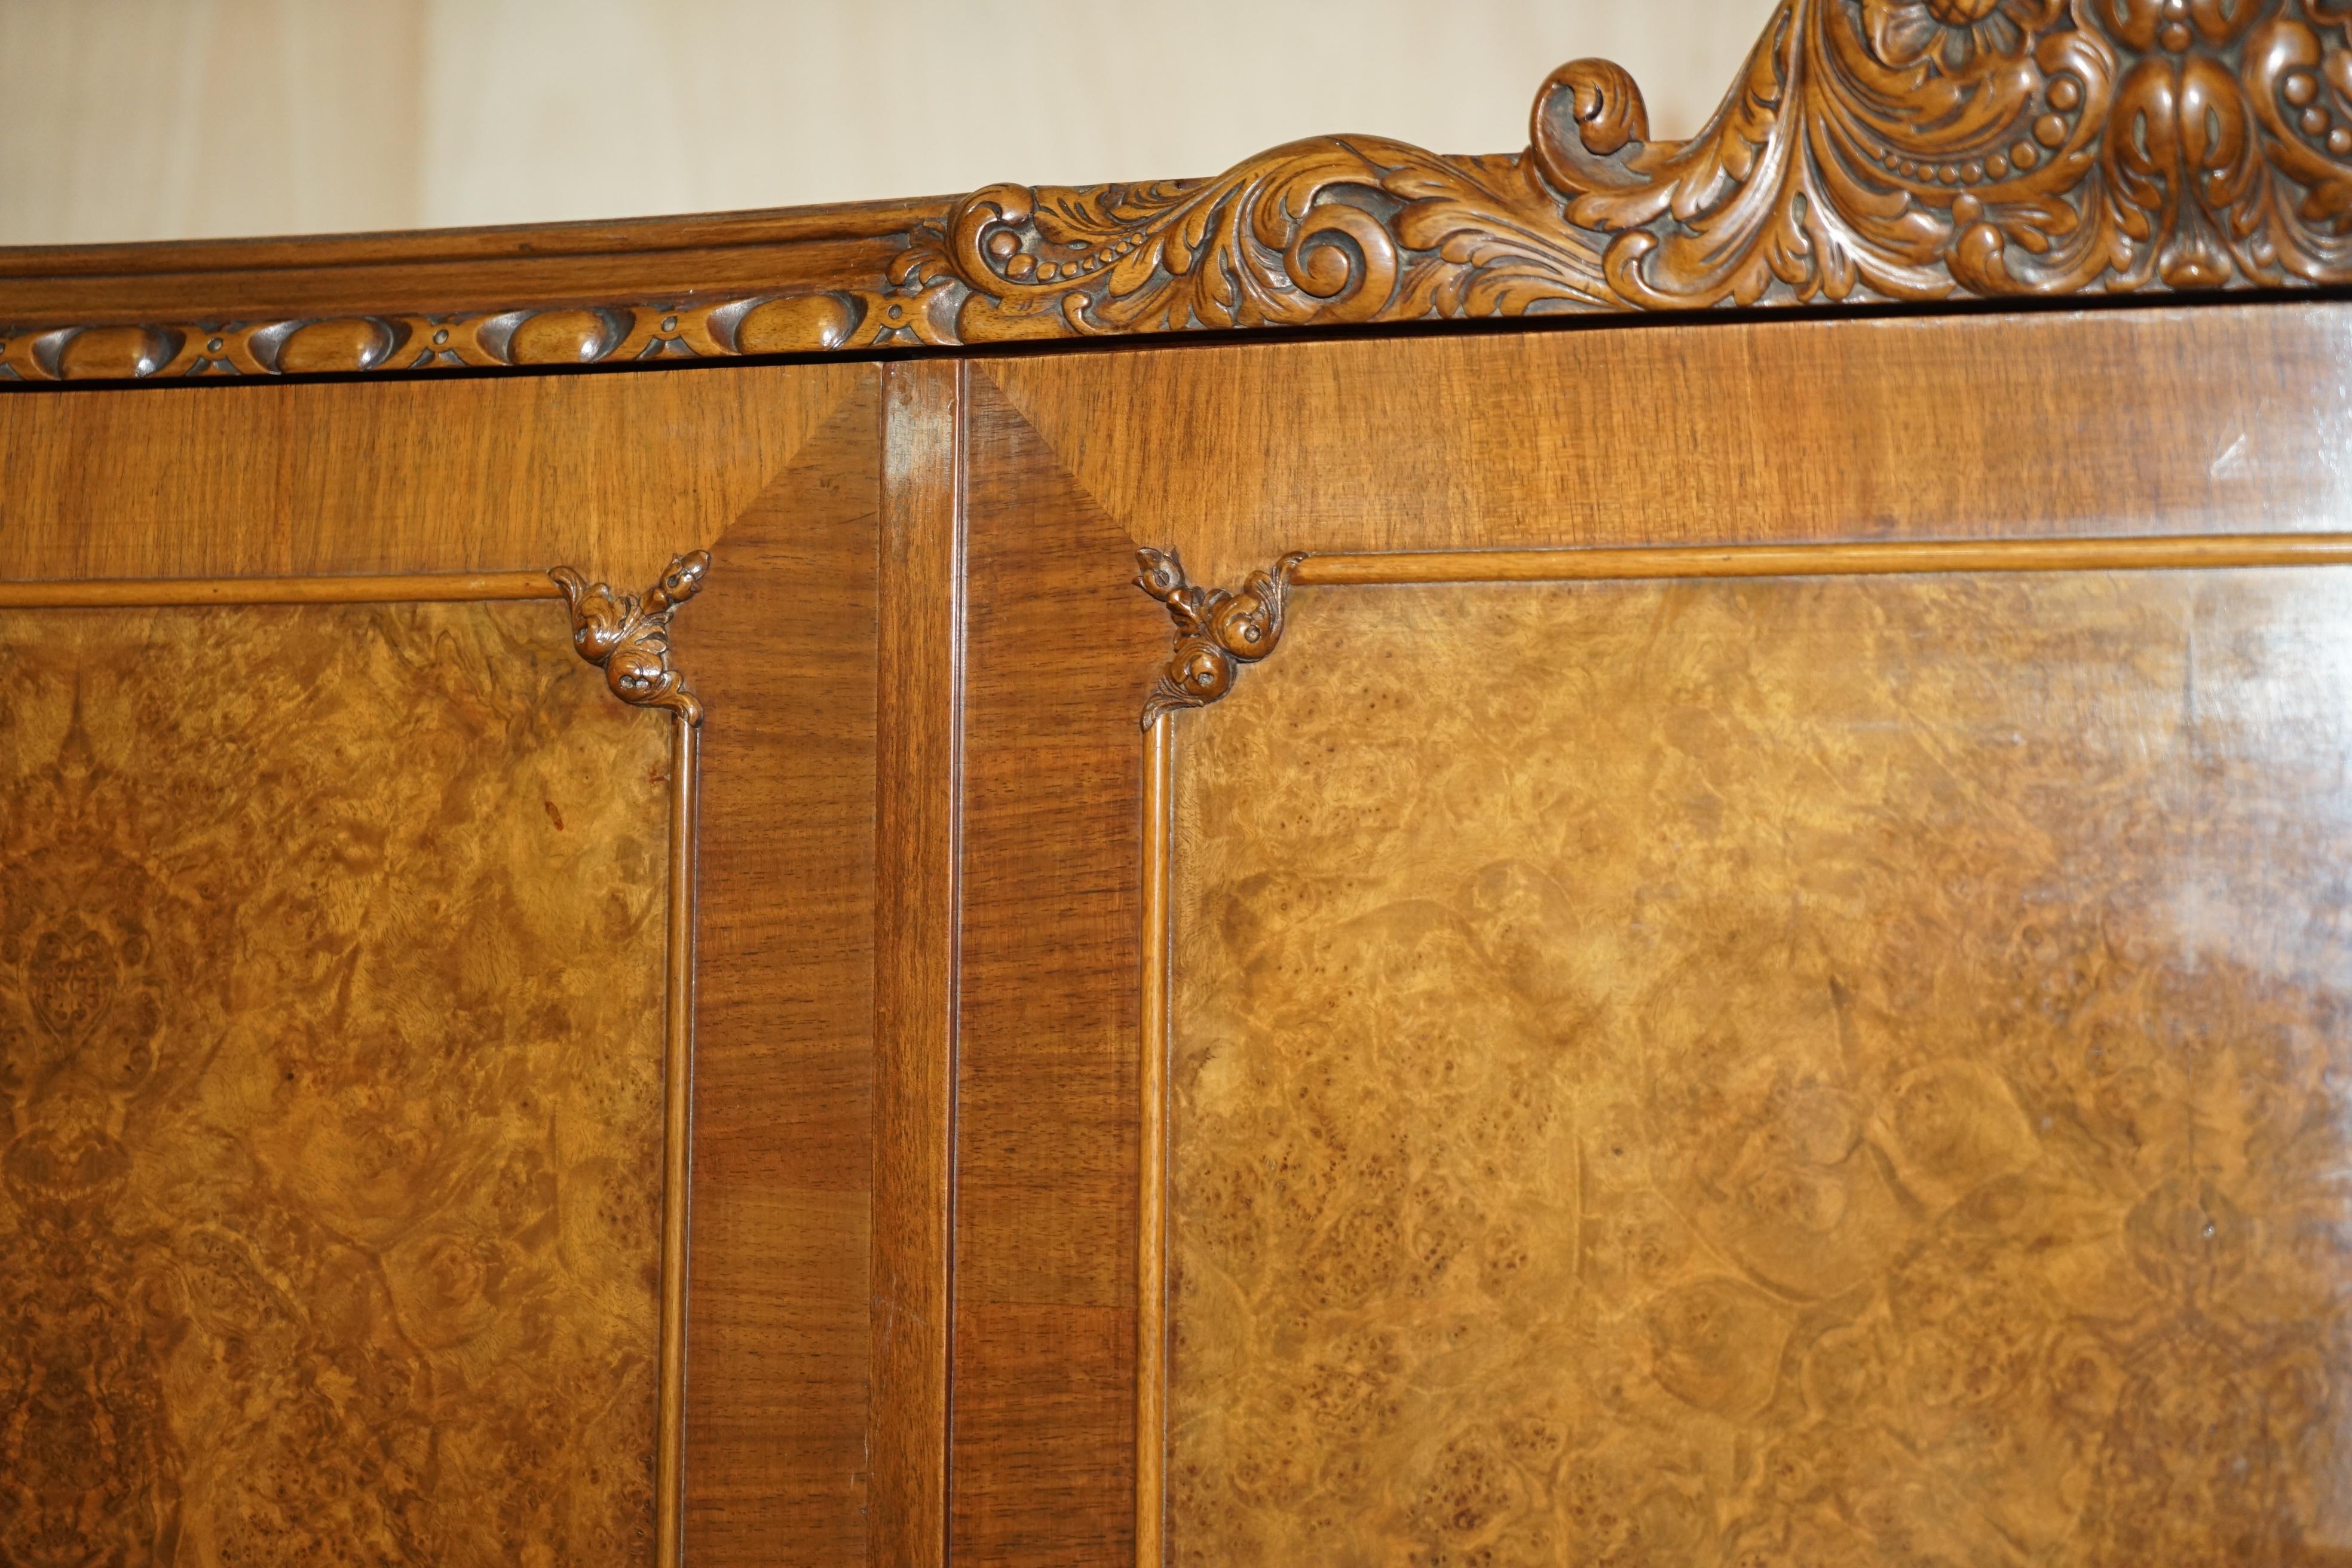 Hand-Crafted Maple & Co circa 1880 Burr Walnut Triple Bank Compactum Wardrobe Part of a Suite